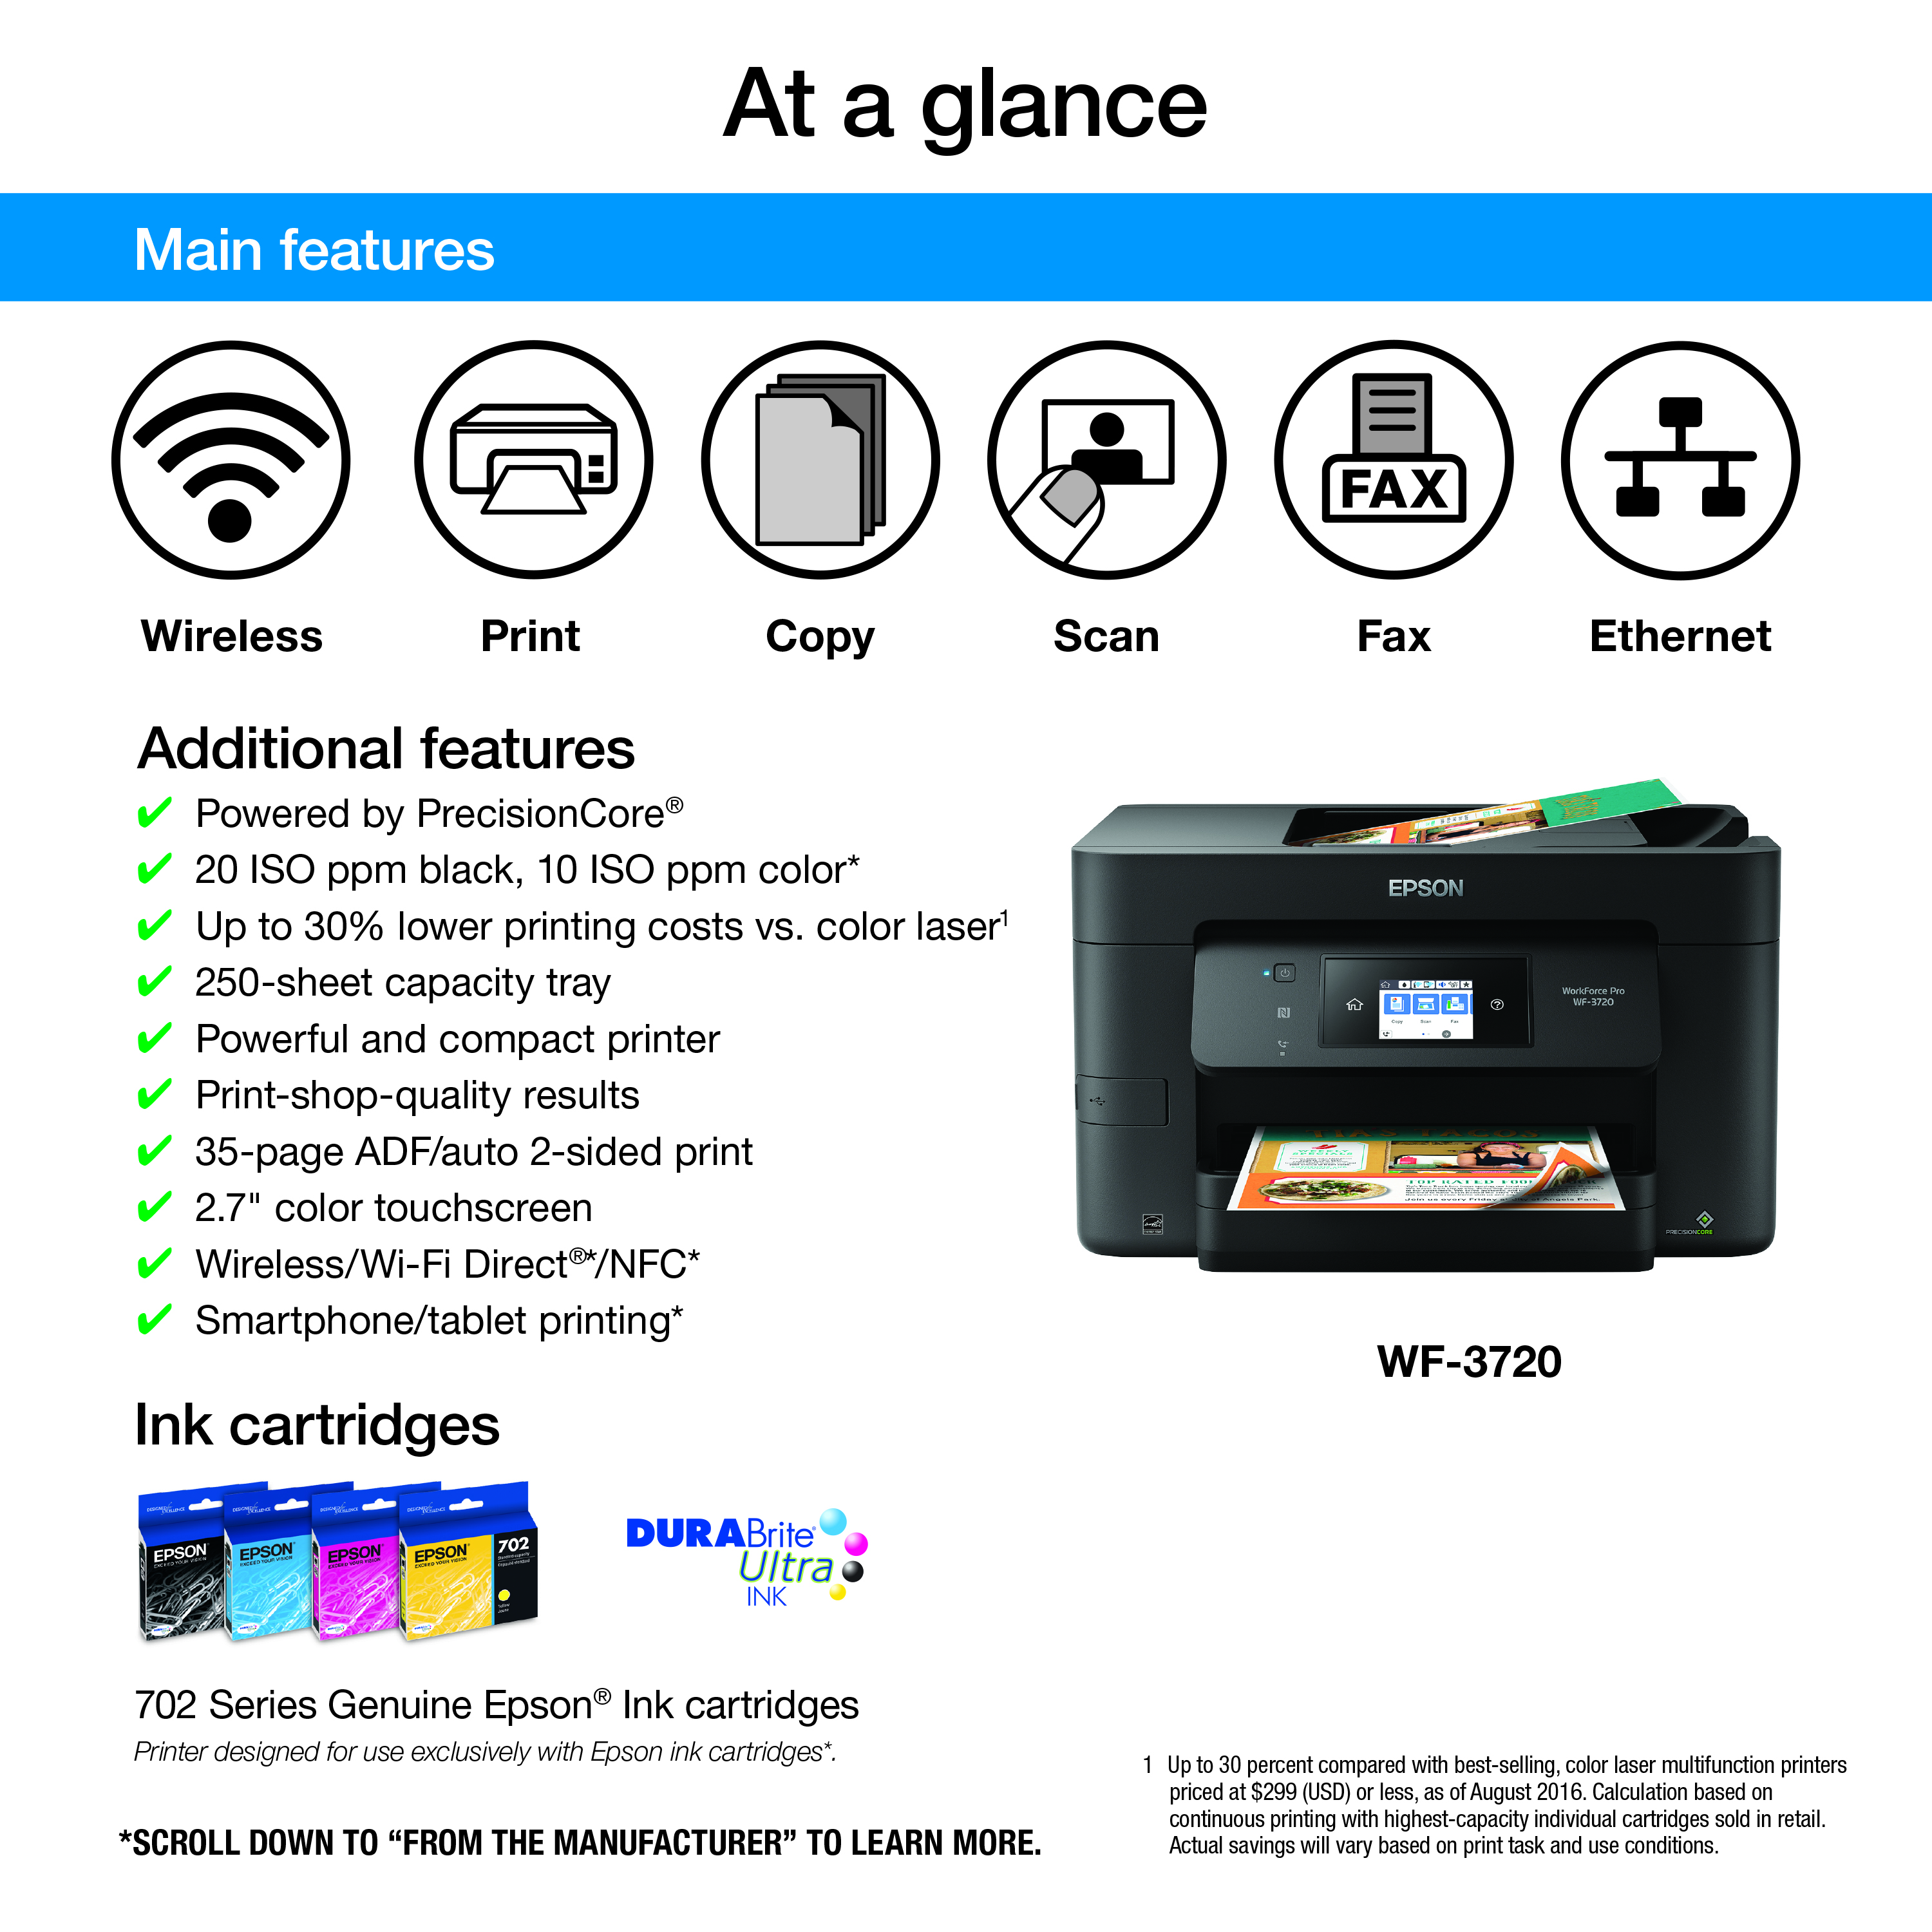 Epson WorkForce Pro WF-3720 Wireless All-in-One Color Inkjet Printer - image 2 of 5